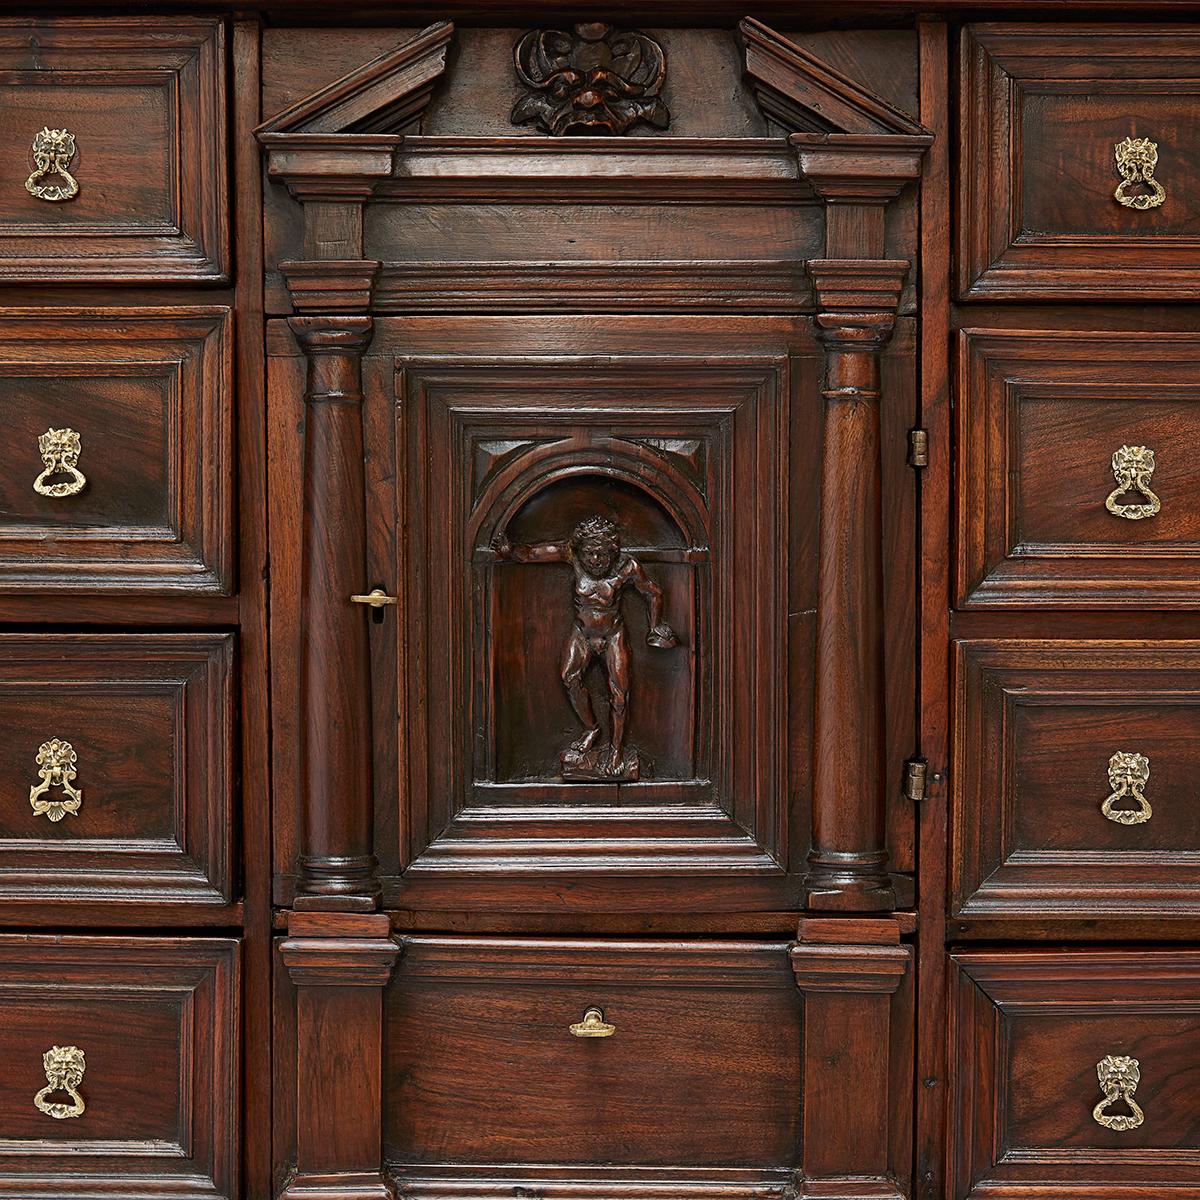 A stunning Genoese carved walnut coin cabinet with twenty-one drawers created to hold secrets from 17th century.  This Italian Louis XIV coin cabinet features an extraordinary  architectural form, the front shows sixteen drawers, two vertical rows